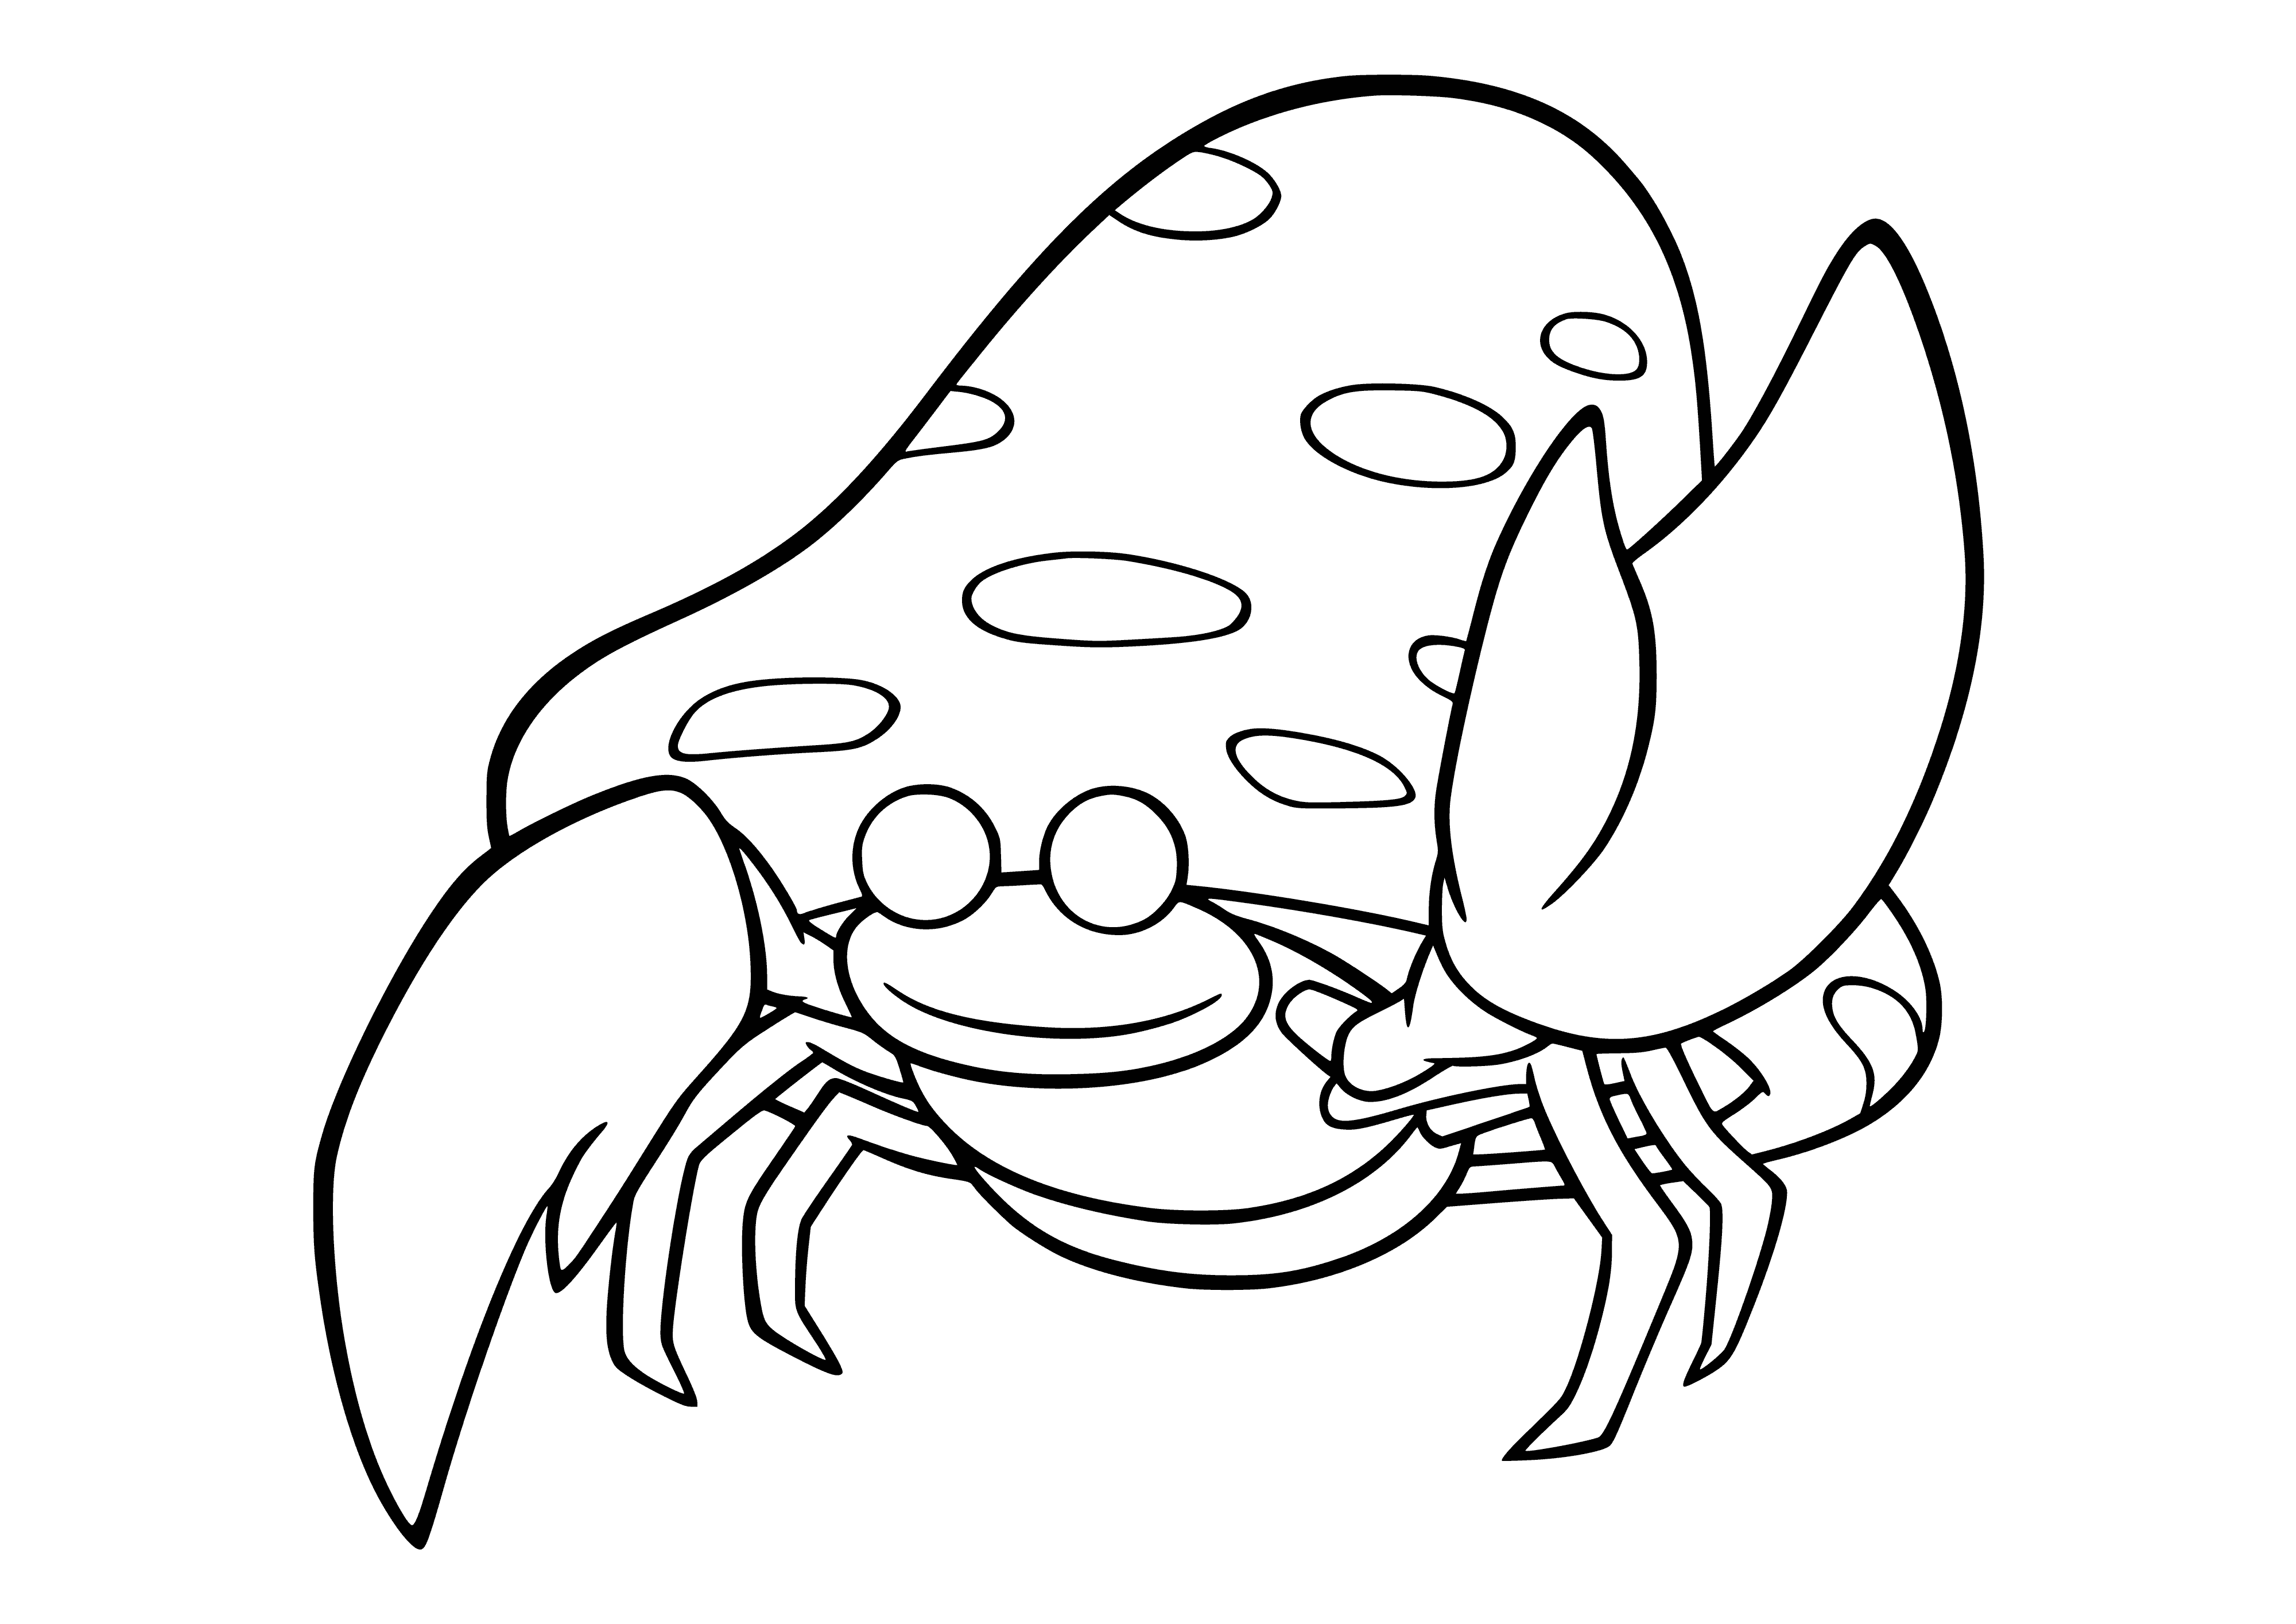 Pokemon Parasect (Parasect) coloring page